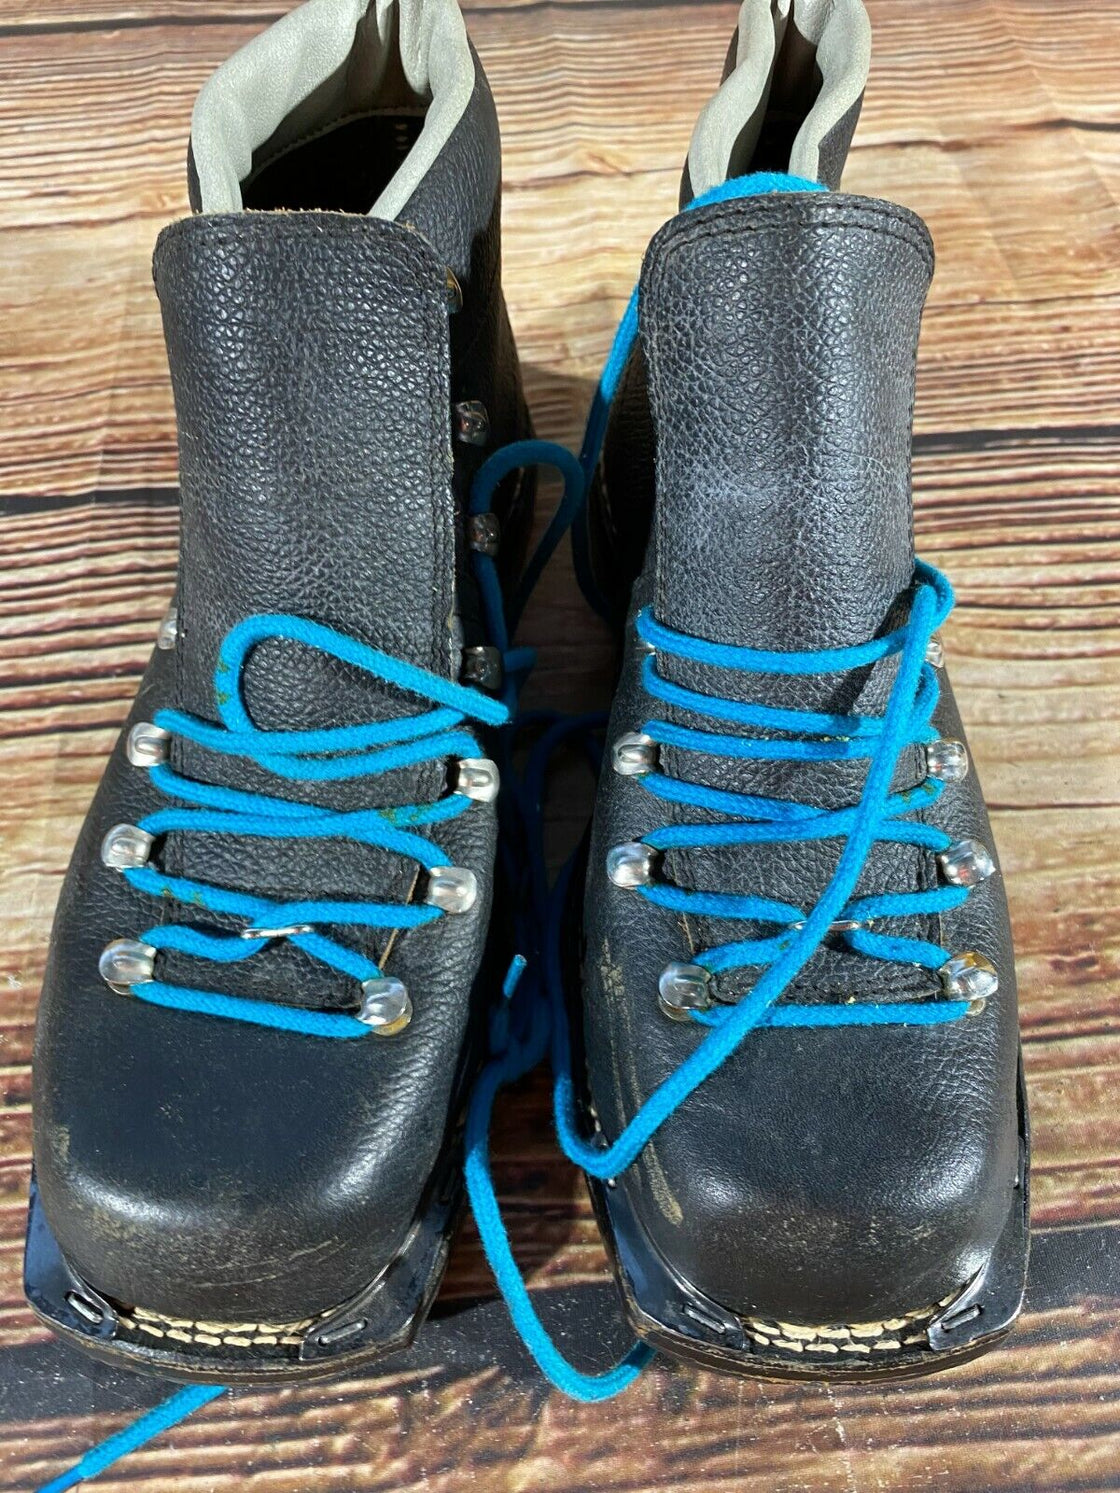 Vintage Cross Country Ski Boots Size EU41 US7.5 for Kandahar Old Cable Bindings